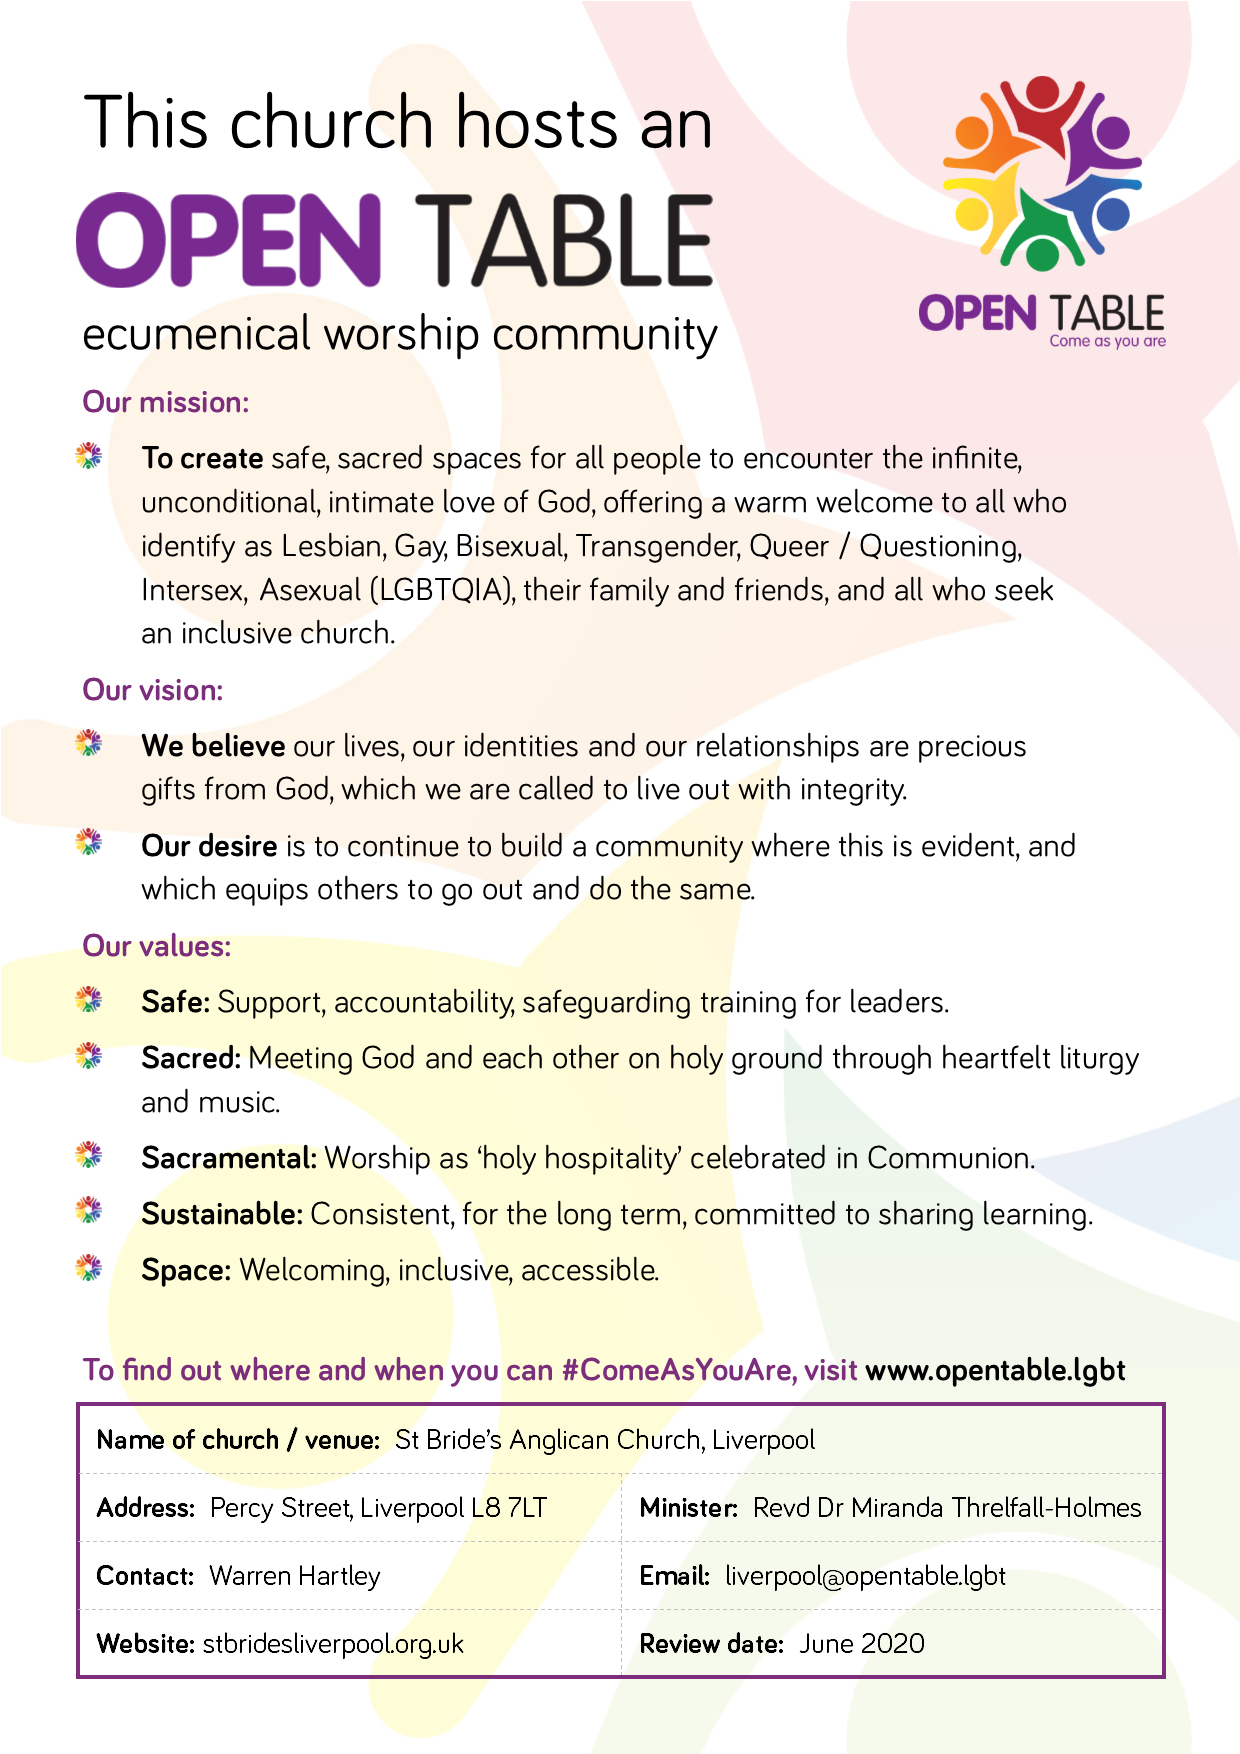  Kieran launched Open Table's new statement of  Mission, Vision and Values  which will also be displayed in churches hosting Open Table communities 